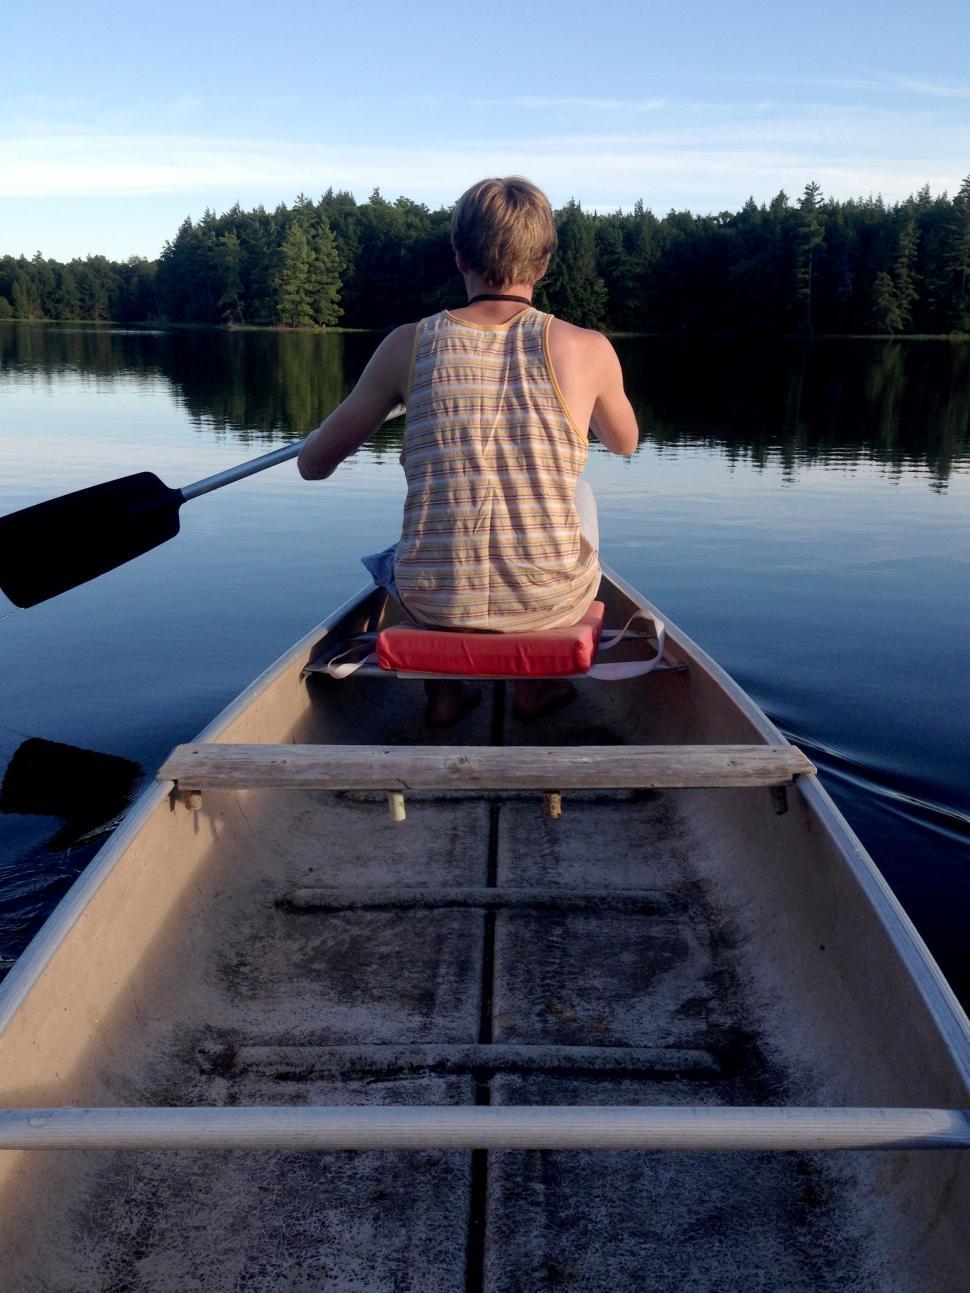 Free Image of Person Canoeing on Lake 